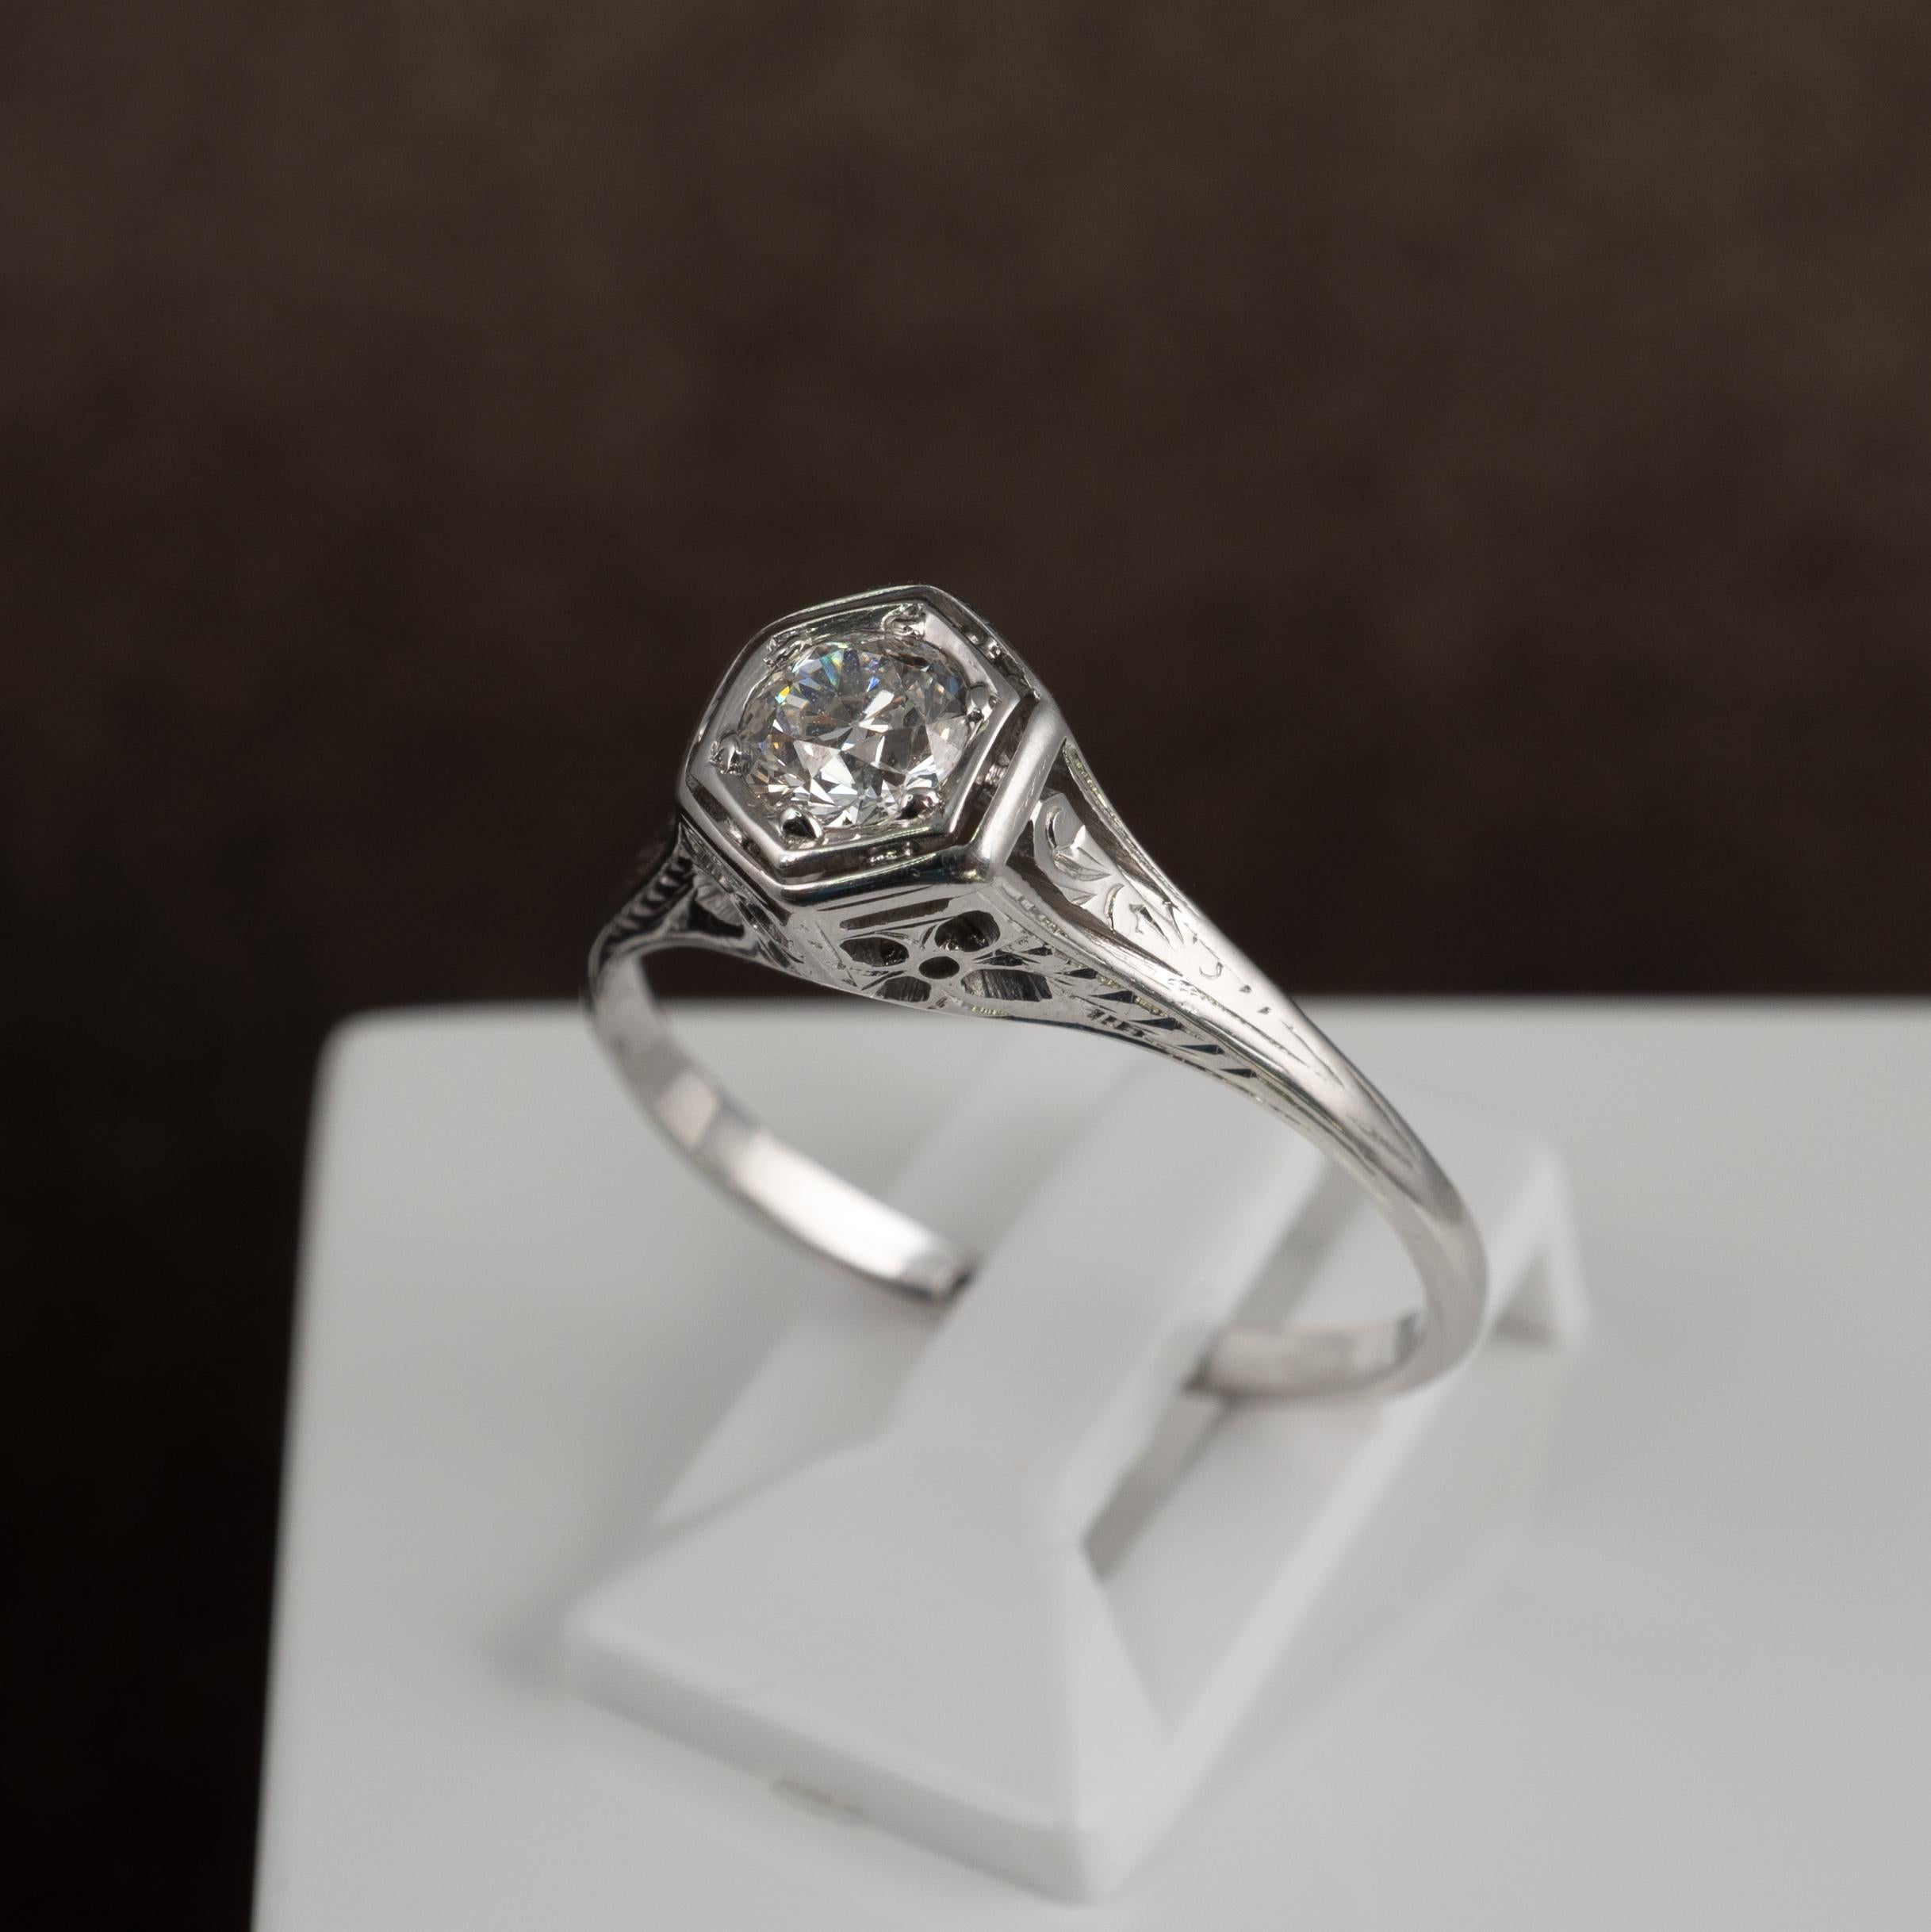 This exemplary Art Deco diamond solitaire, crafted beautifully in 18 karat white gold, is presented in fabulous condition. The hexagon shape setting is set with a VS1 quality 0.50ct old cut eye clean diamond that is truly outstanding. 

The setting